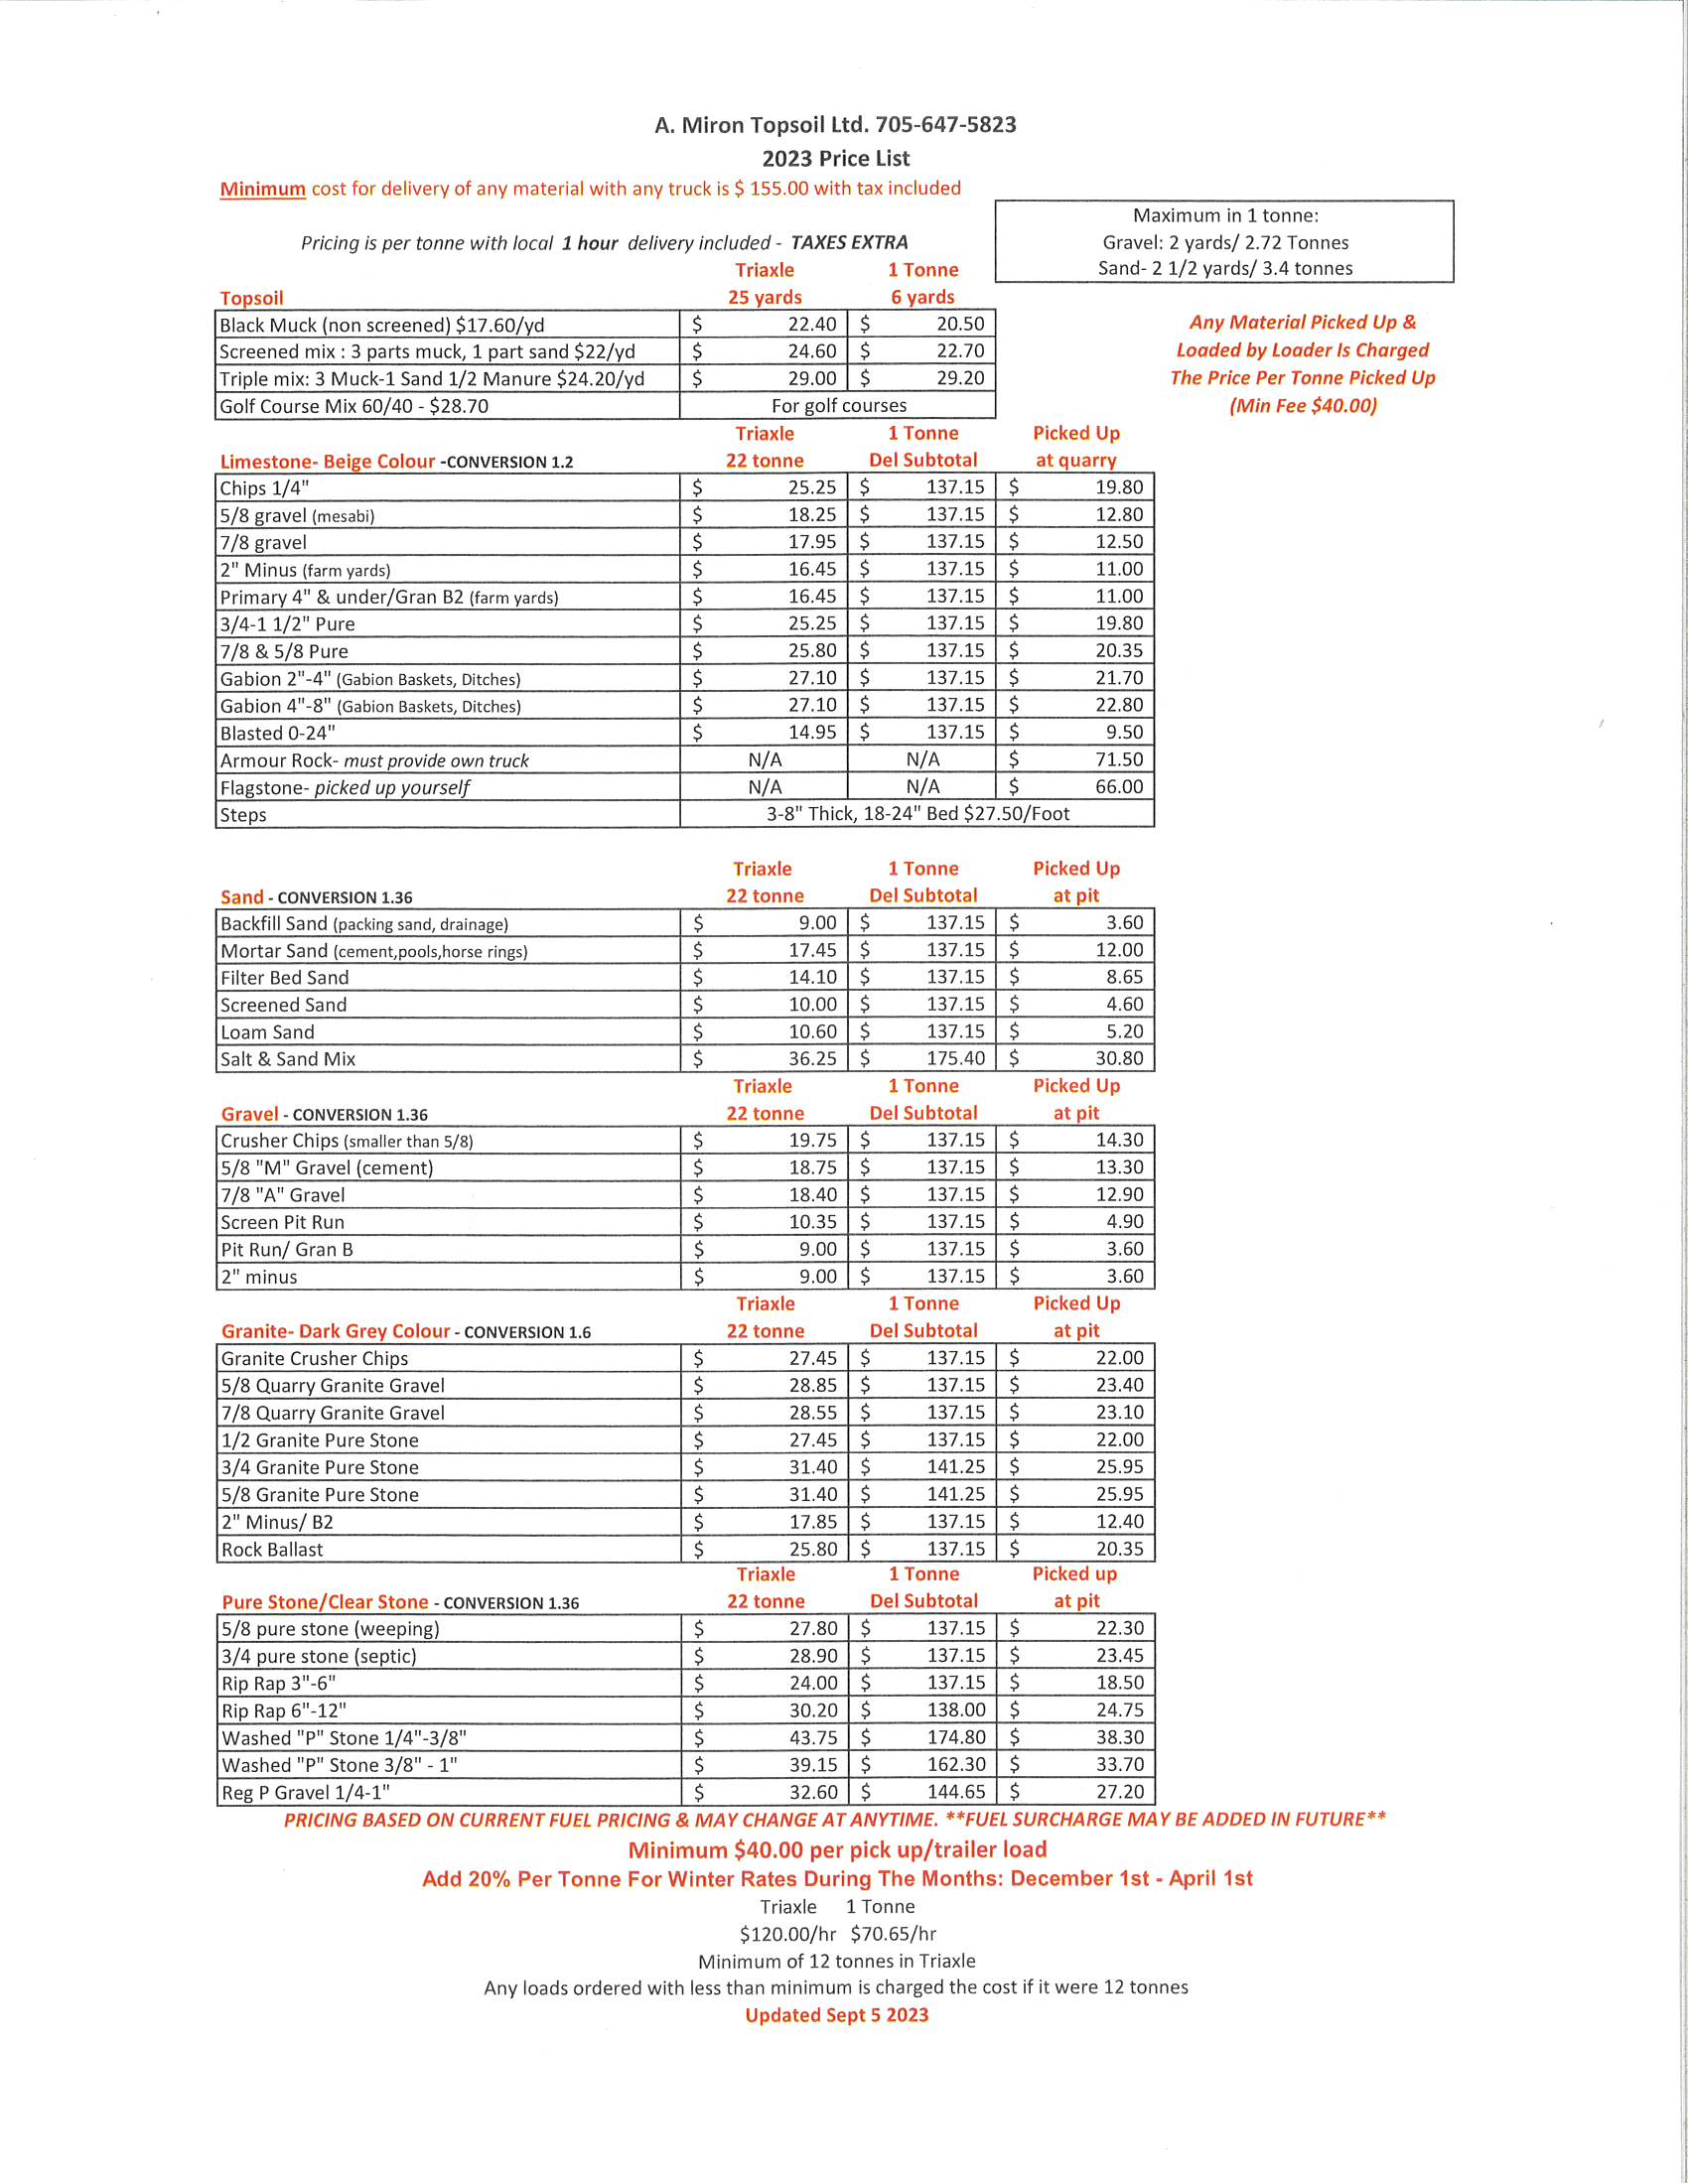 Aggregate Price List at A. Miront Topsoil